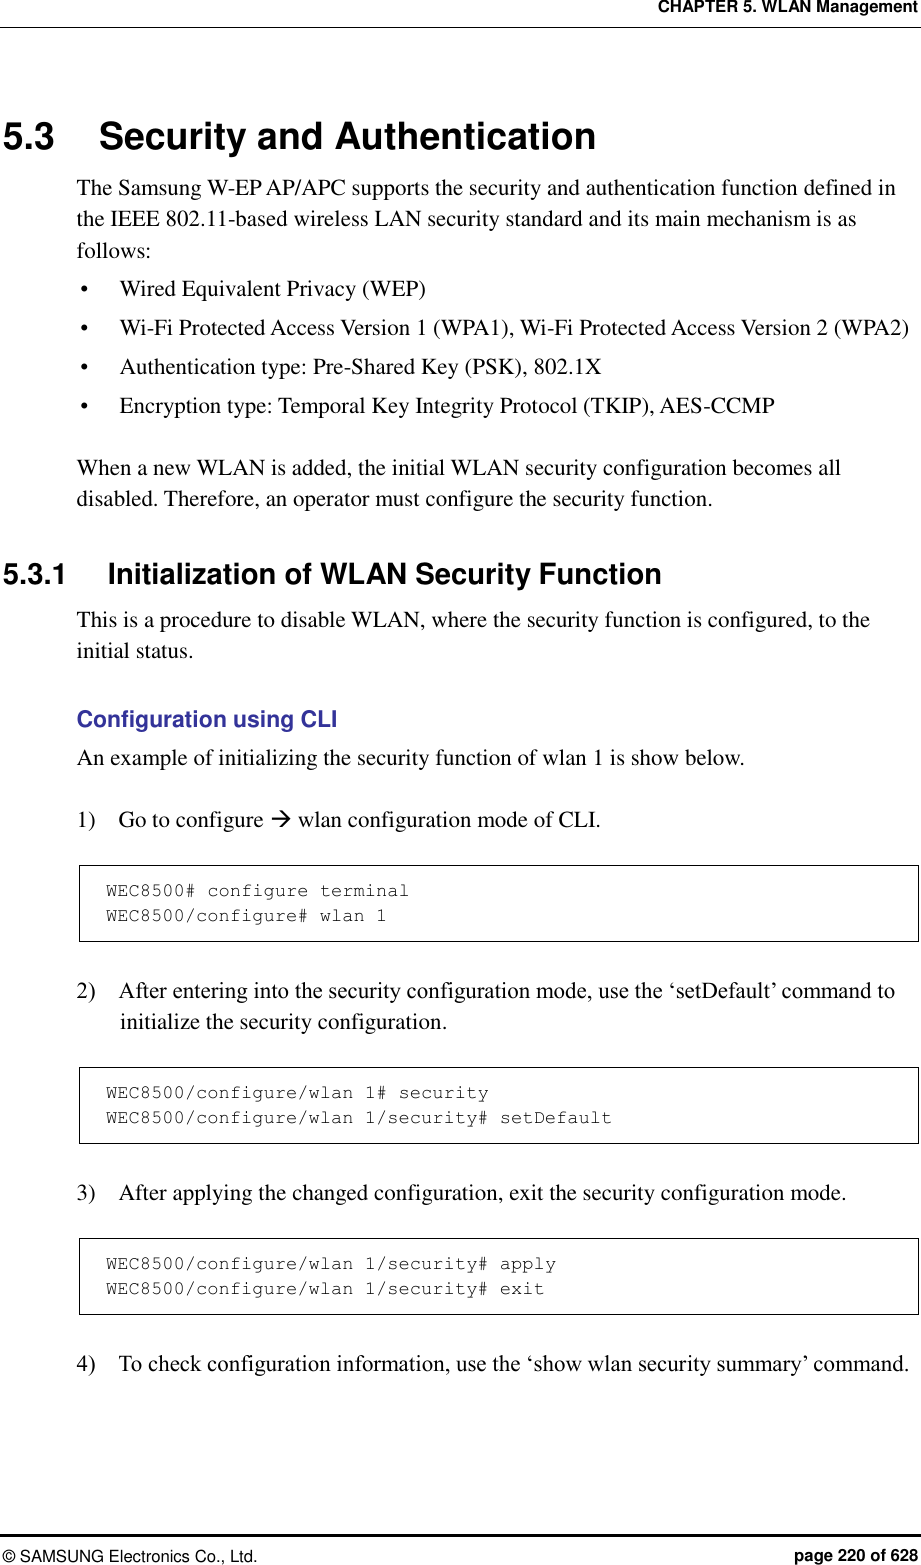 CHAPTER 5. WLAN Management ©  SAMSUNG Electronics Co., Ltd.  page 220 of 628 5.3  Security and Authentication The Samsung W-EP AP/APC supports the security and authentication function defined in the IEEE 802.11-based wireless LAN security standard and its main mechanism is as follows:  Wired Equivalent Privacy (WEP)  Wi-Fi Protected Access Version 1 (WPA1), Wi-Fi Protected Access Version 2 (WPA2)  Authentication type: Pre-Shared Key (PSK), 802.1X  Encryption type: Temporal Key Integrity Protocol (TKIP), AES-CCMP  When a new WLAN is added, the initial WLAN security configuration becomes all disabled. Therefore, an operator must configure the security function.    5.3.1  Initialization of WLAN Security Function This is a procedure to disable WLAN, where the security function is configured, to the initial status.  Configuration using CLI An example of initializing the security function of wlan 1 is show below.  1)    Go to configure  wlan configuration mode of CLI.    WEC8500# configure terminal WEC8500/configure# wlan 1   2)    After entering into the security configuration mode, use the ‘setDefault’ command to initialize the security configuration.  WEC8500/configure/wlan 1# security WEC8500/configure/wlan 1/security# setDefault  3)    After applying the changed configuration, exit the security configuration mode.  WEC8500/configure/wlan 1/security# apply WEC8500/configure/wlan 1/security# exit  4)    To check configuration information, use the ‘show wlan security summary’ command.  